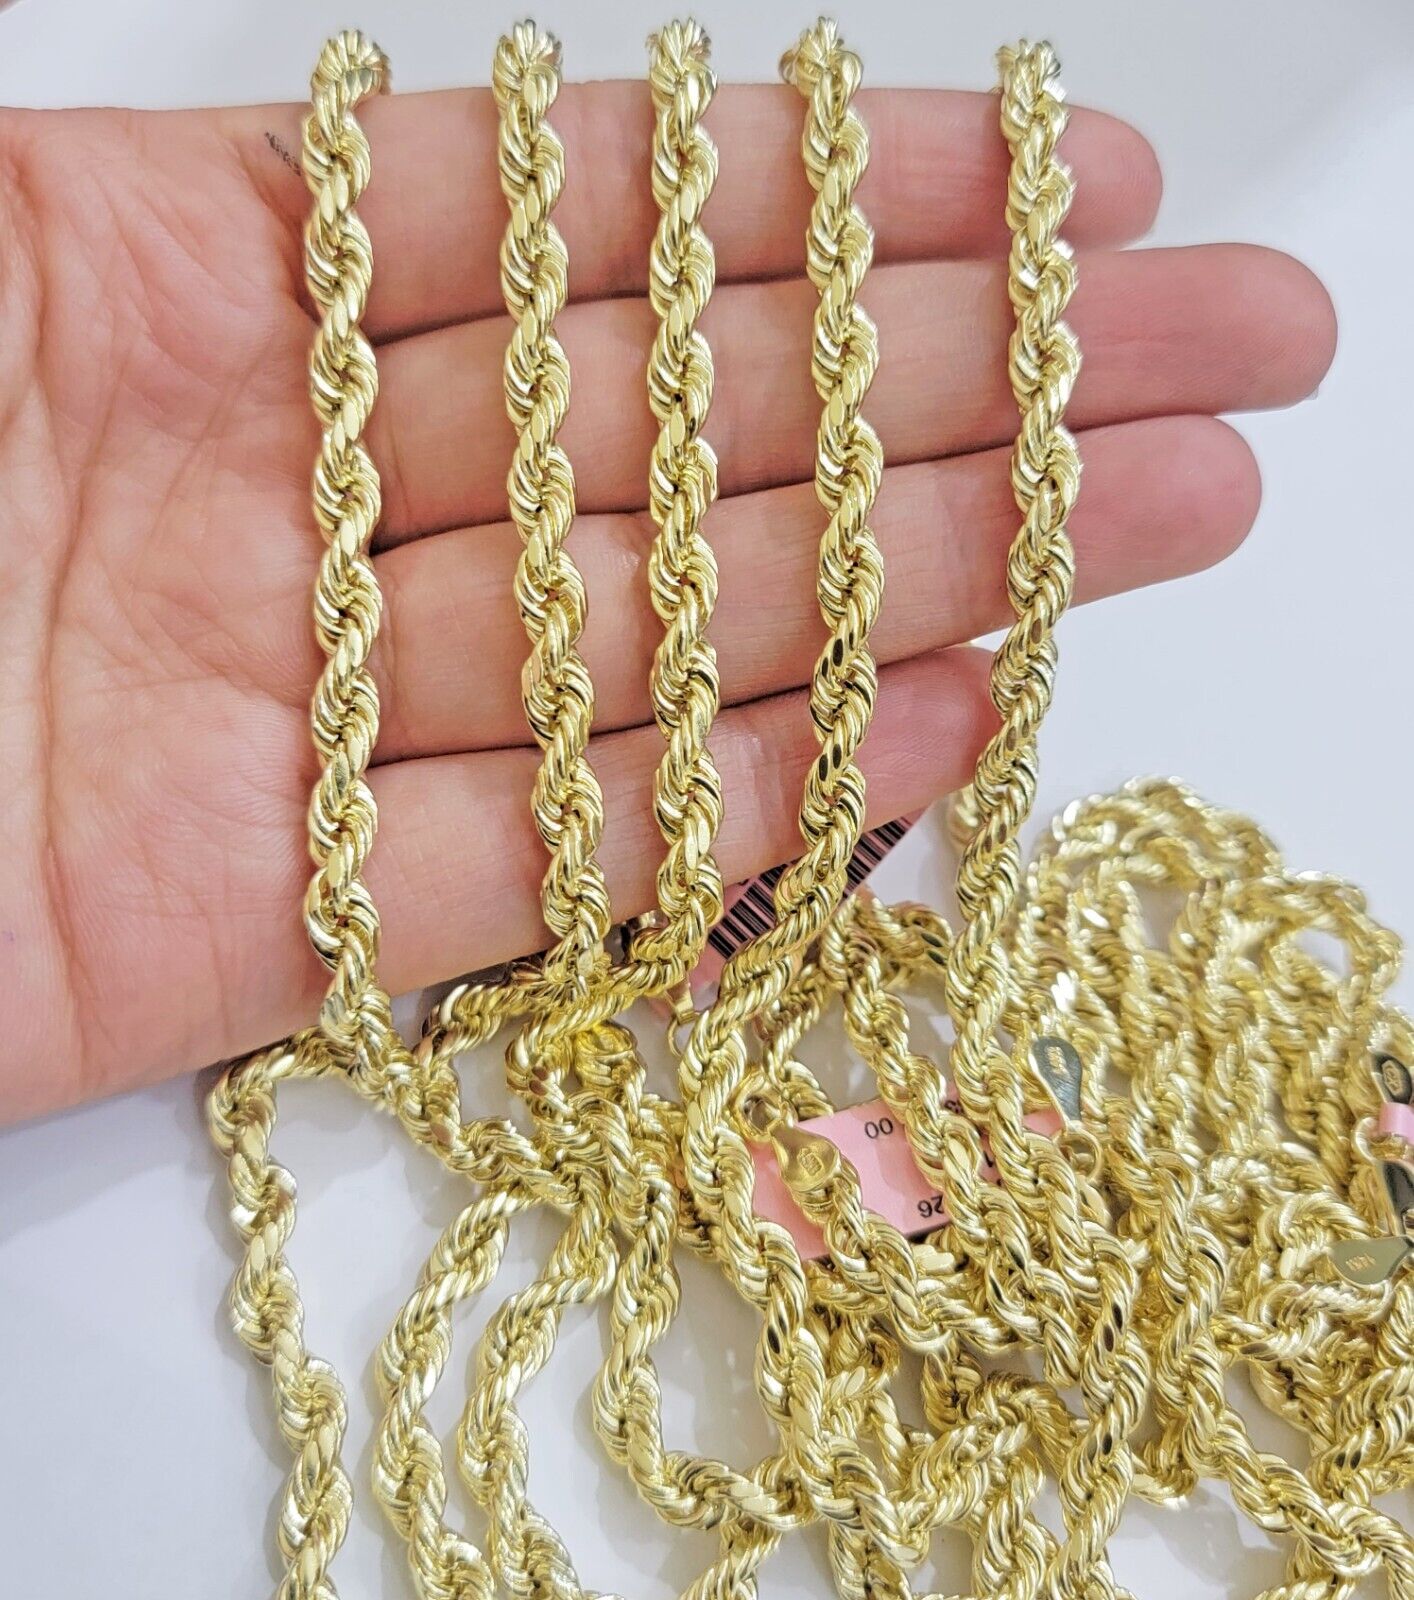 14k Tri-Color Gold 5mm Rope Chain 22 Inches